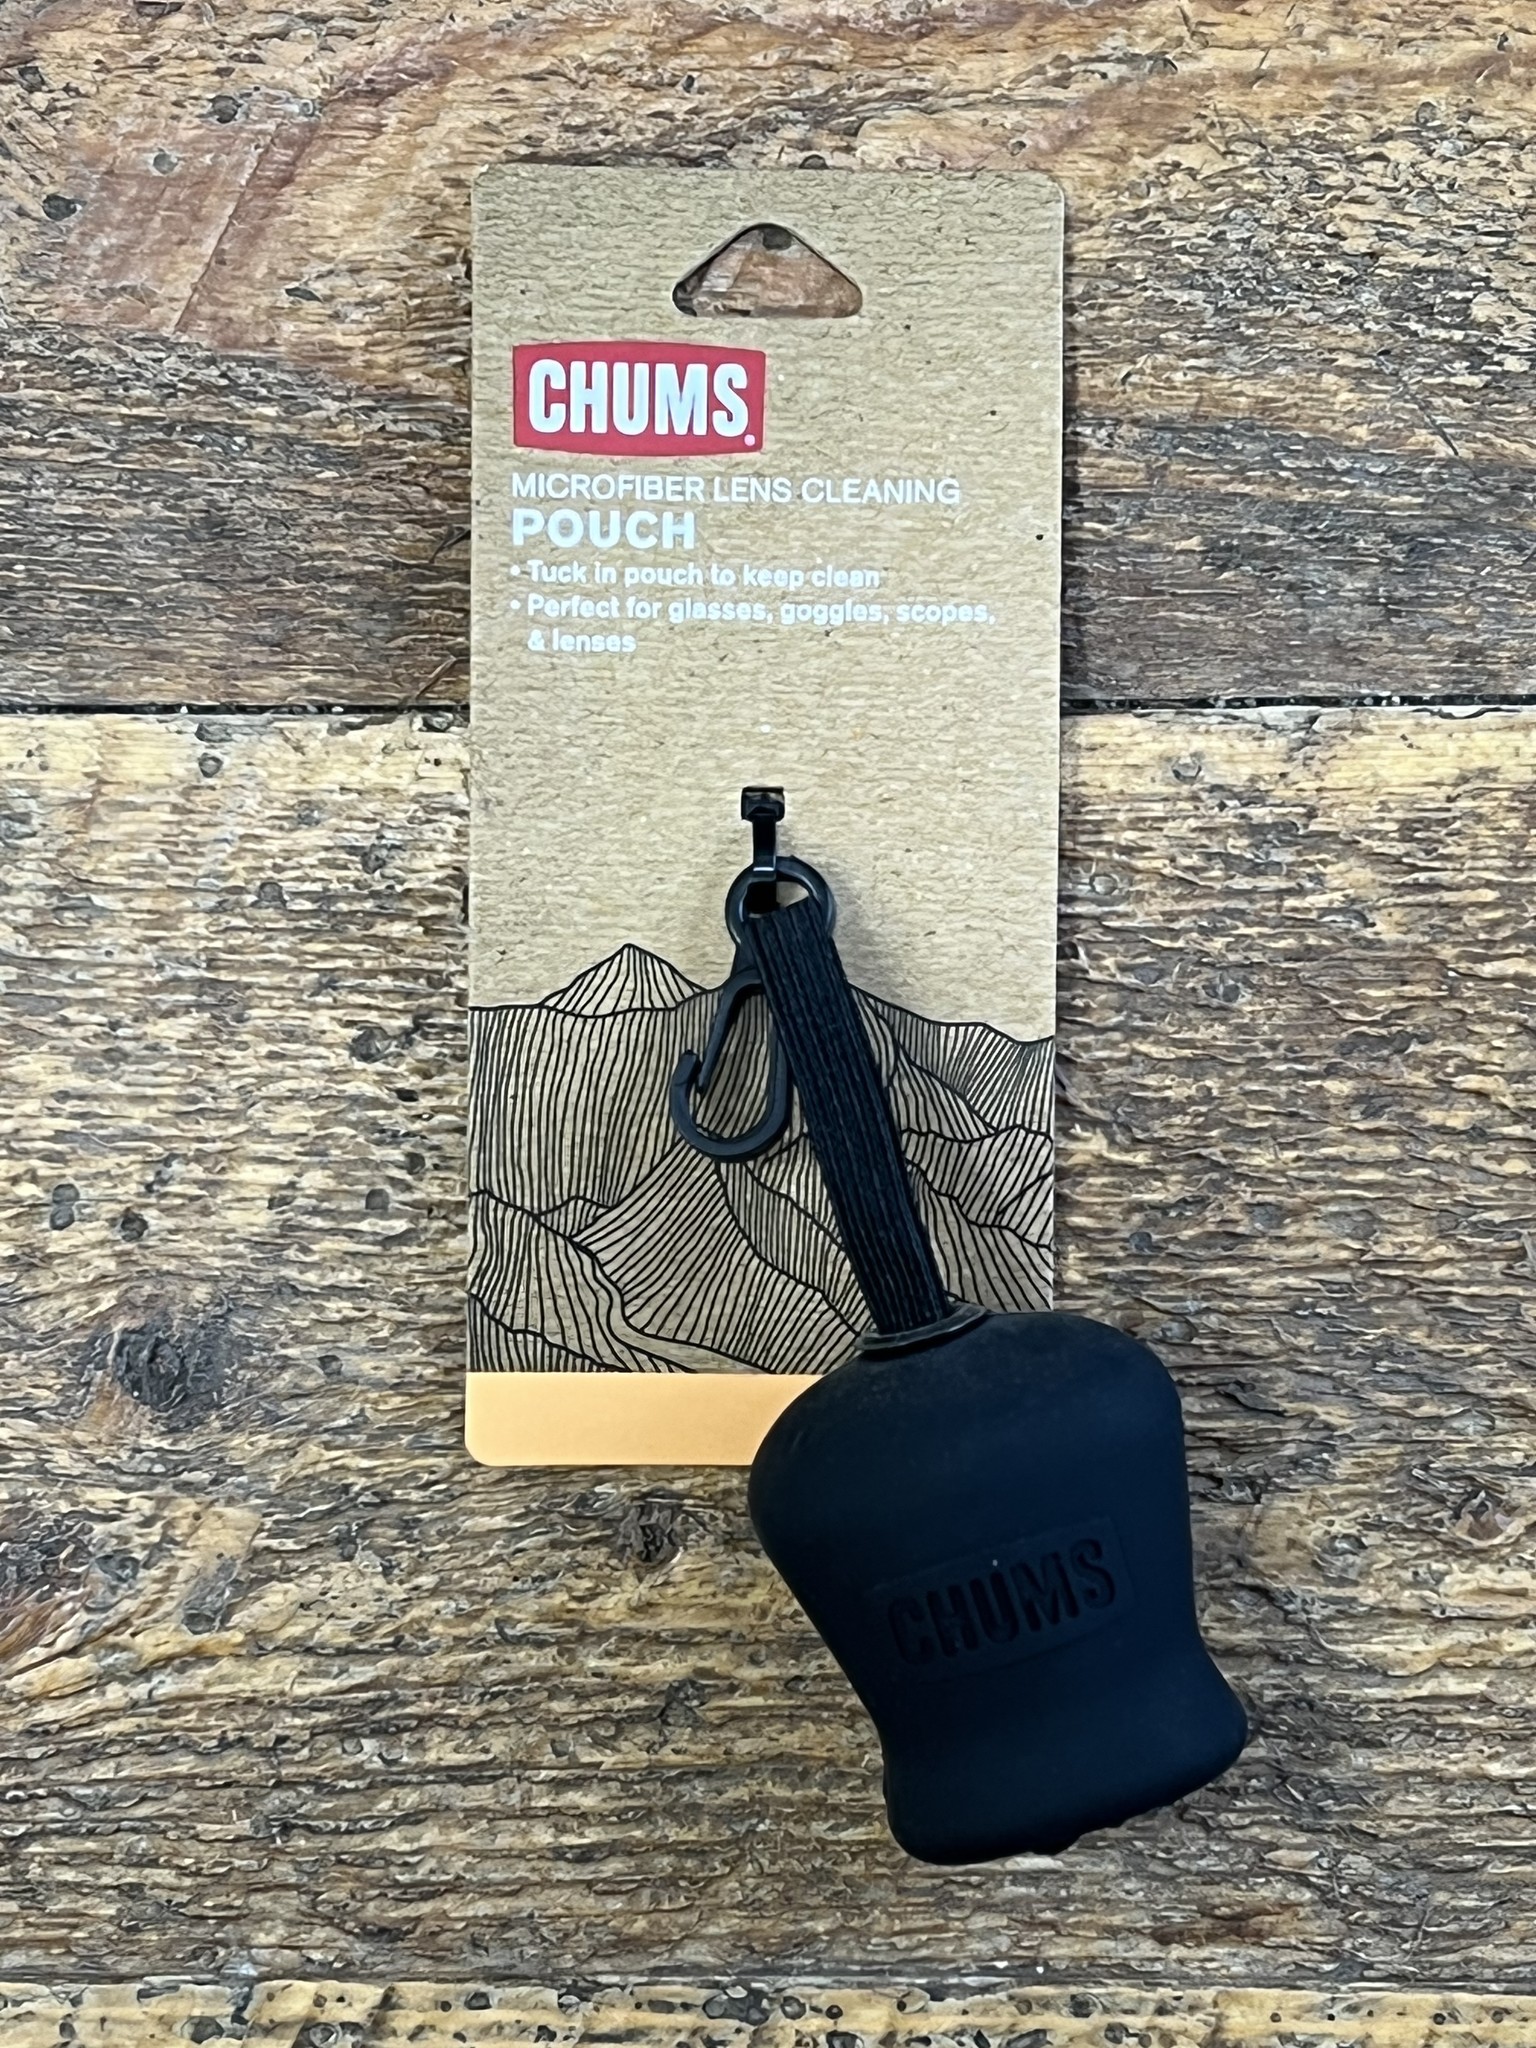 Chums Microfiber Lens Cleaning Pouch